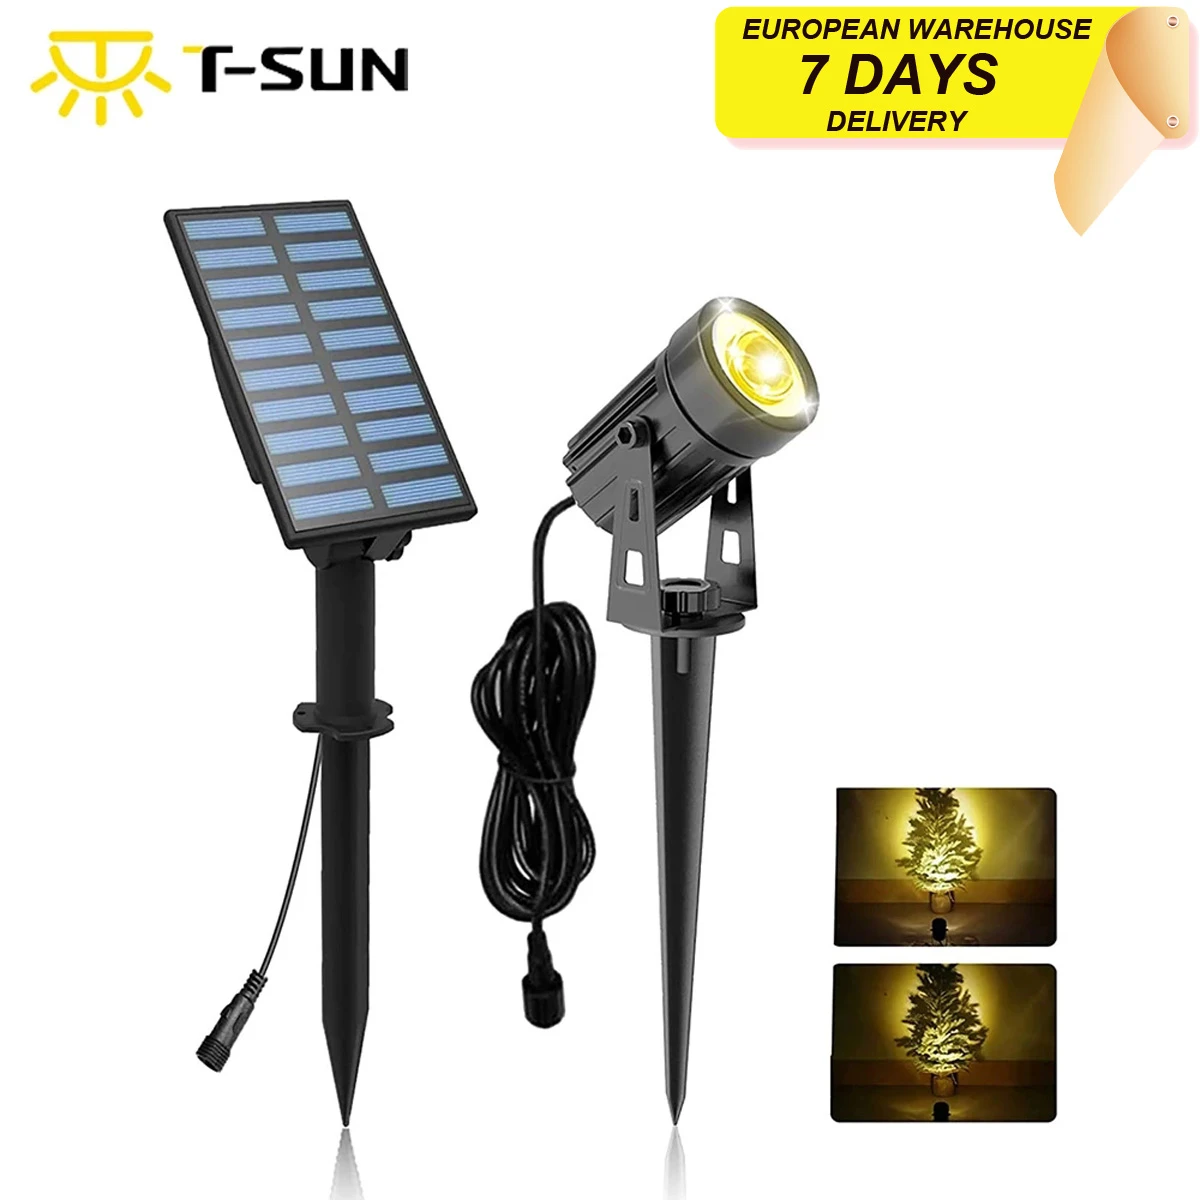 T-SUN LED Solar Spotlights Purple Waterproof Outdoor Security Landscape Lamps 2 Pack Auto-on/Auto-Off by Day Pool Area Patio Yard Stairs Garden 180 Angle Adjustable for Tree Driveway 